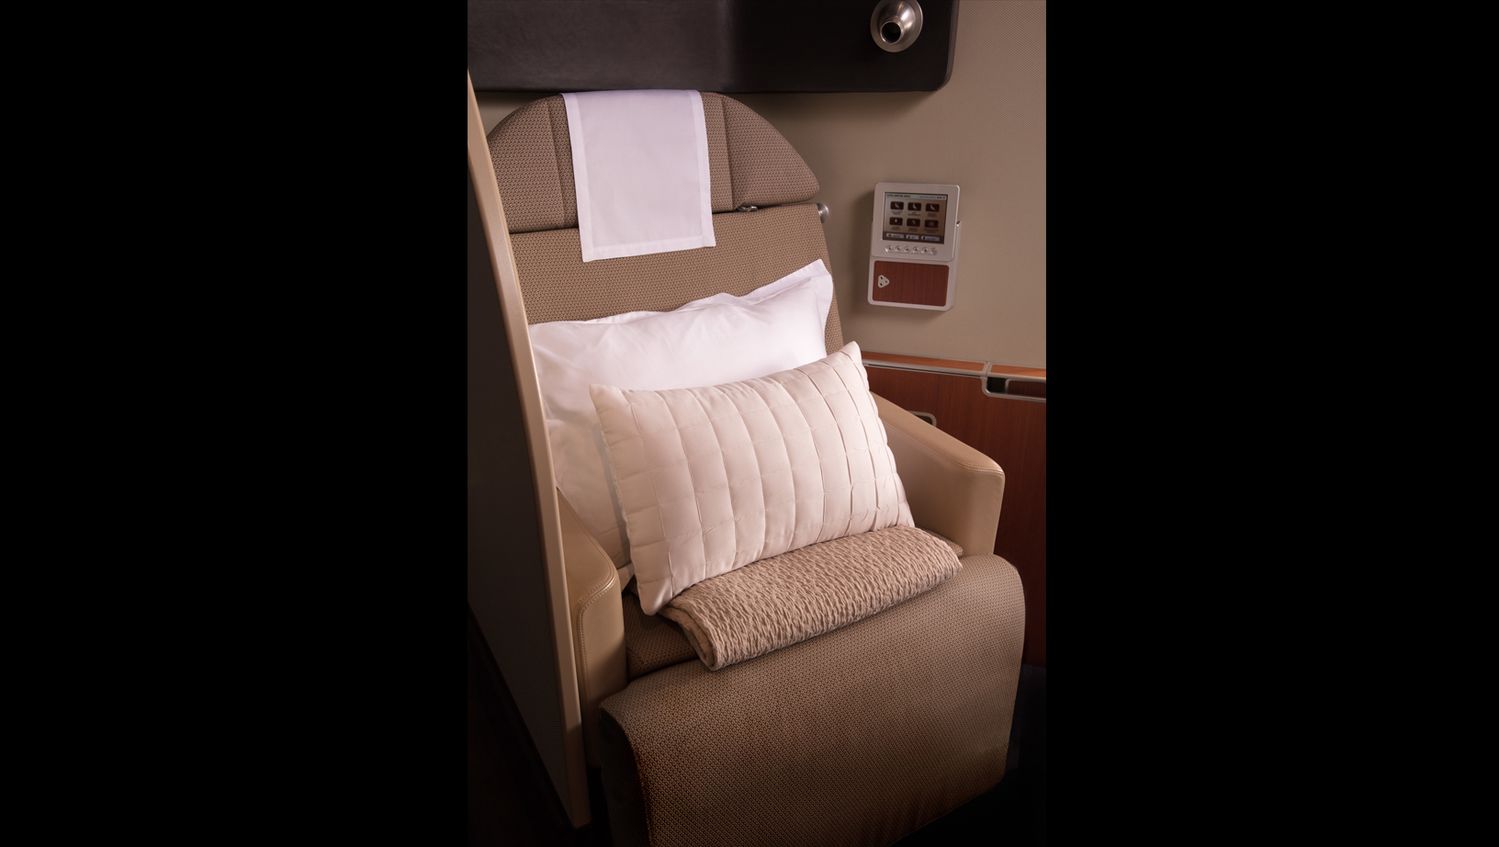 The airline has partnered with Australian premium home and lifestyle brand Sheridan for a range of new bedding products for first class flights from early October 2017.